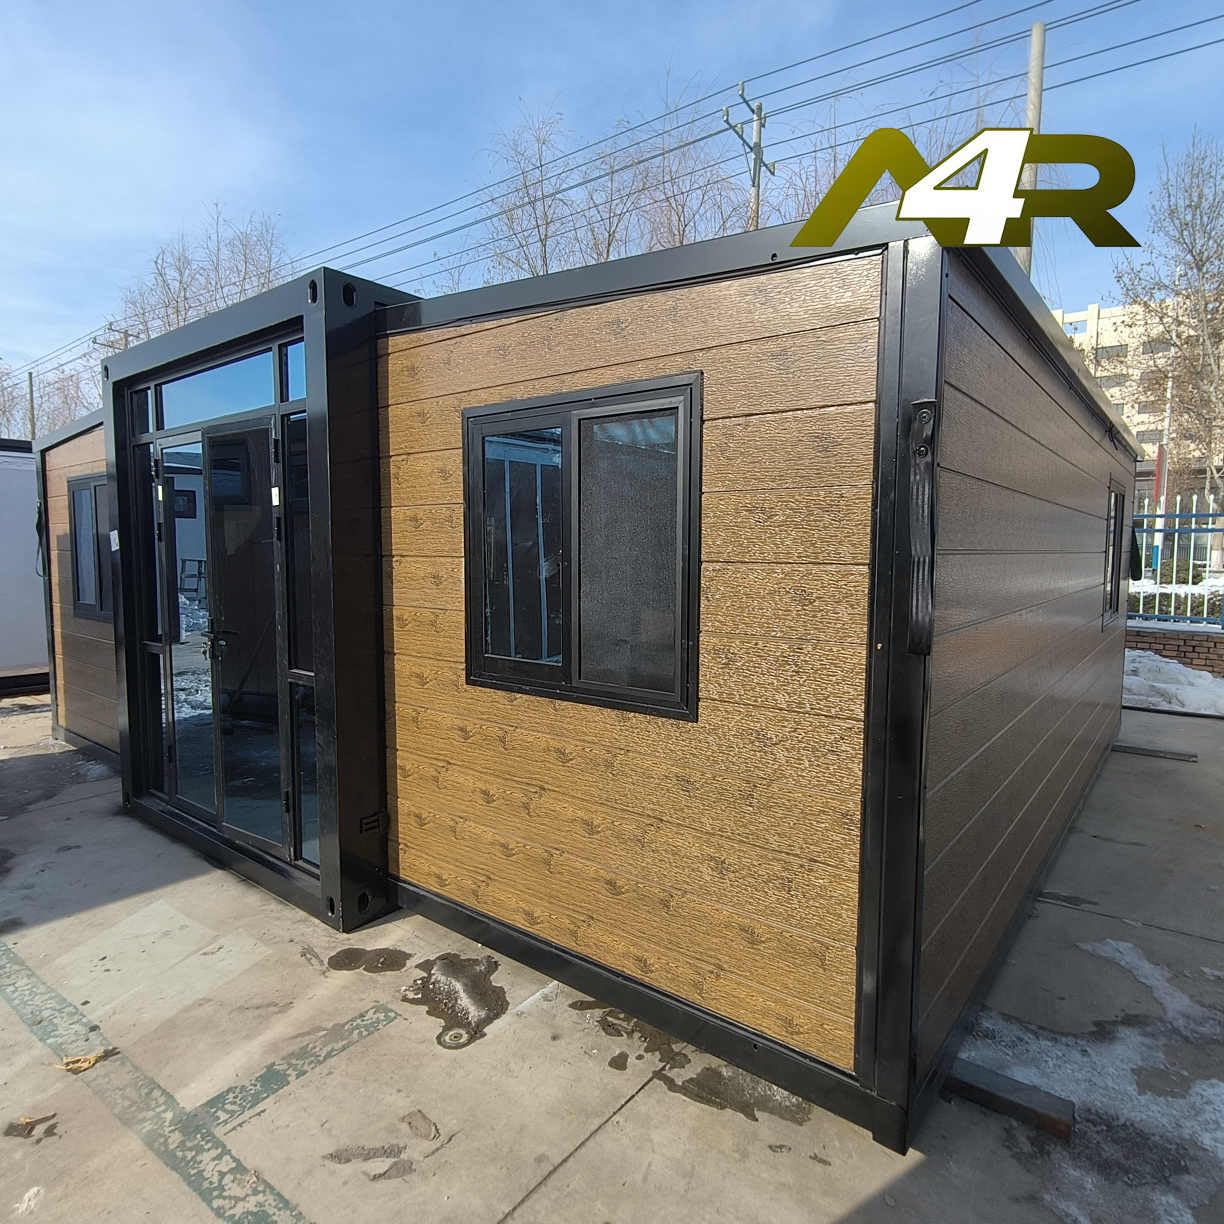 Portable Prefabricated Tiny Home 19 X 20ft Expandable House Container with 2 Bedroom, Bathroom, Lockable Door, Windows, Kitchen Cabinet, Sink and Light Switches